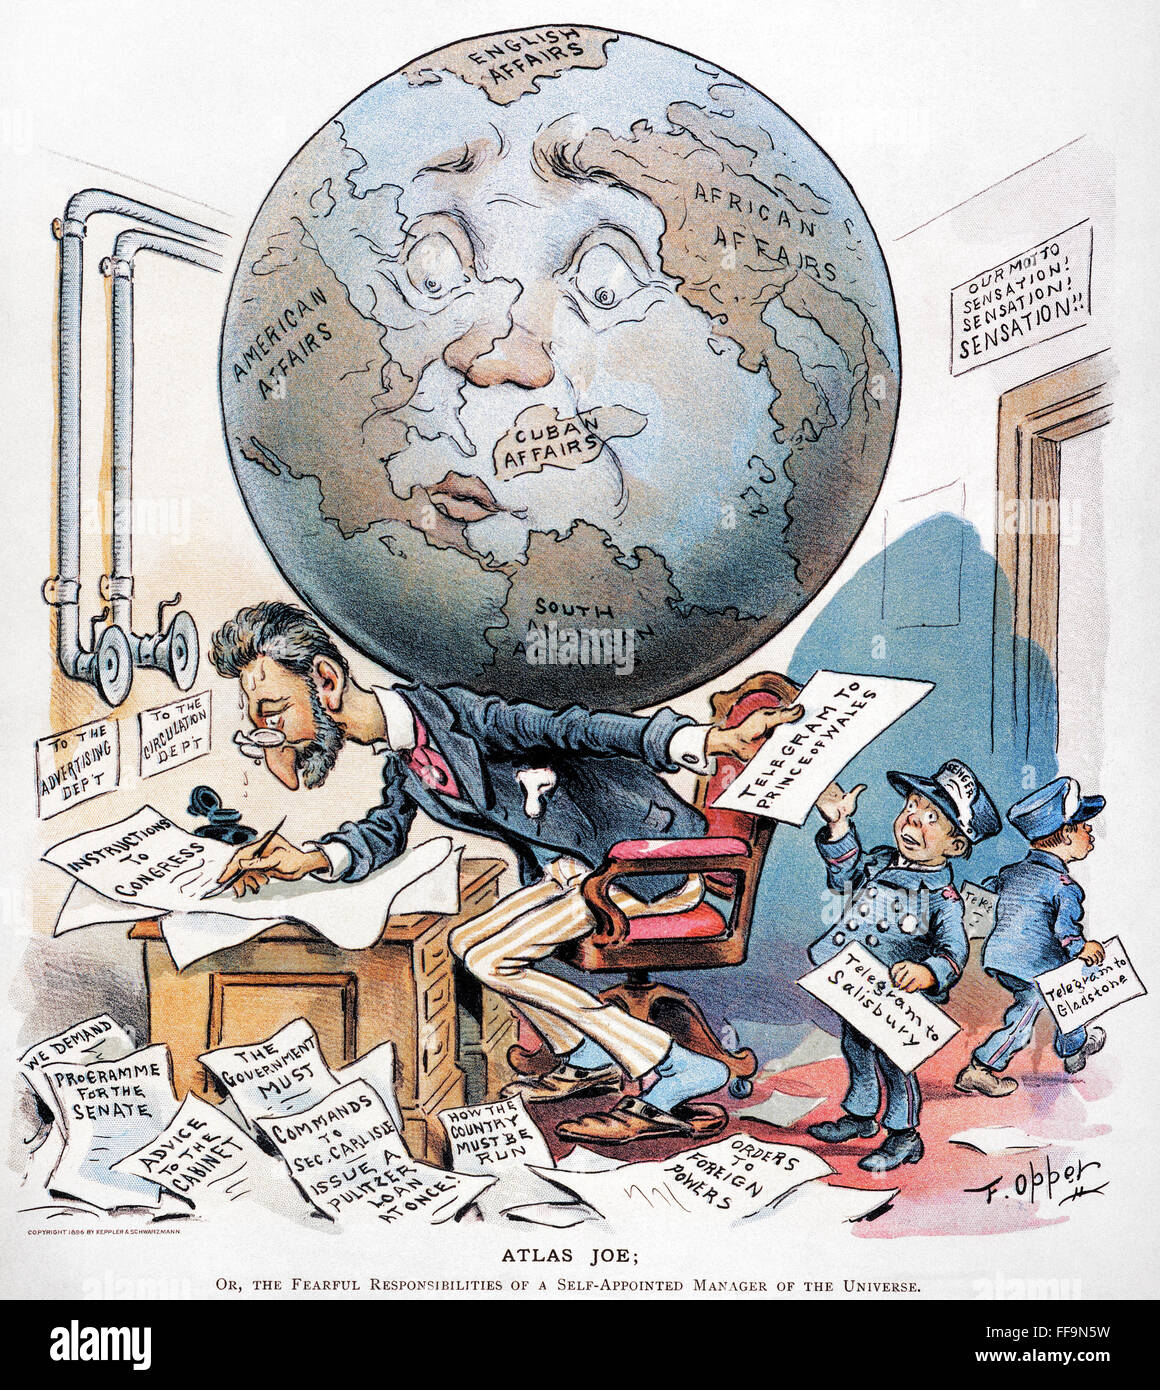 JOSEPH PULITZER CARTOON/n'Atlas Joe': American cartoon, 1896, by Frederick Opper, showing Joseph Pulitzer (1847-1911) busily trying to influence world affairs through his newspapers and through memorandums to authorities and world leaders. Stock Photo